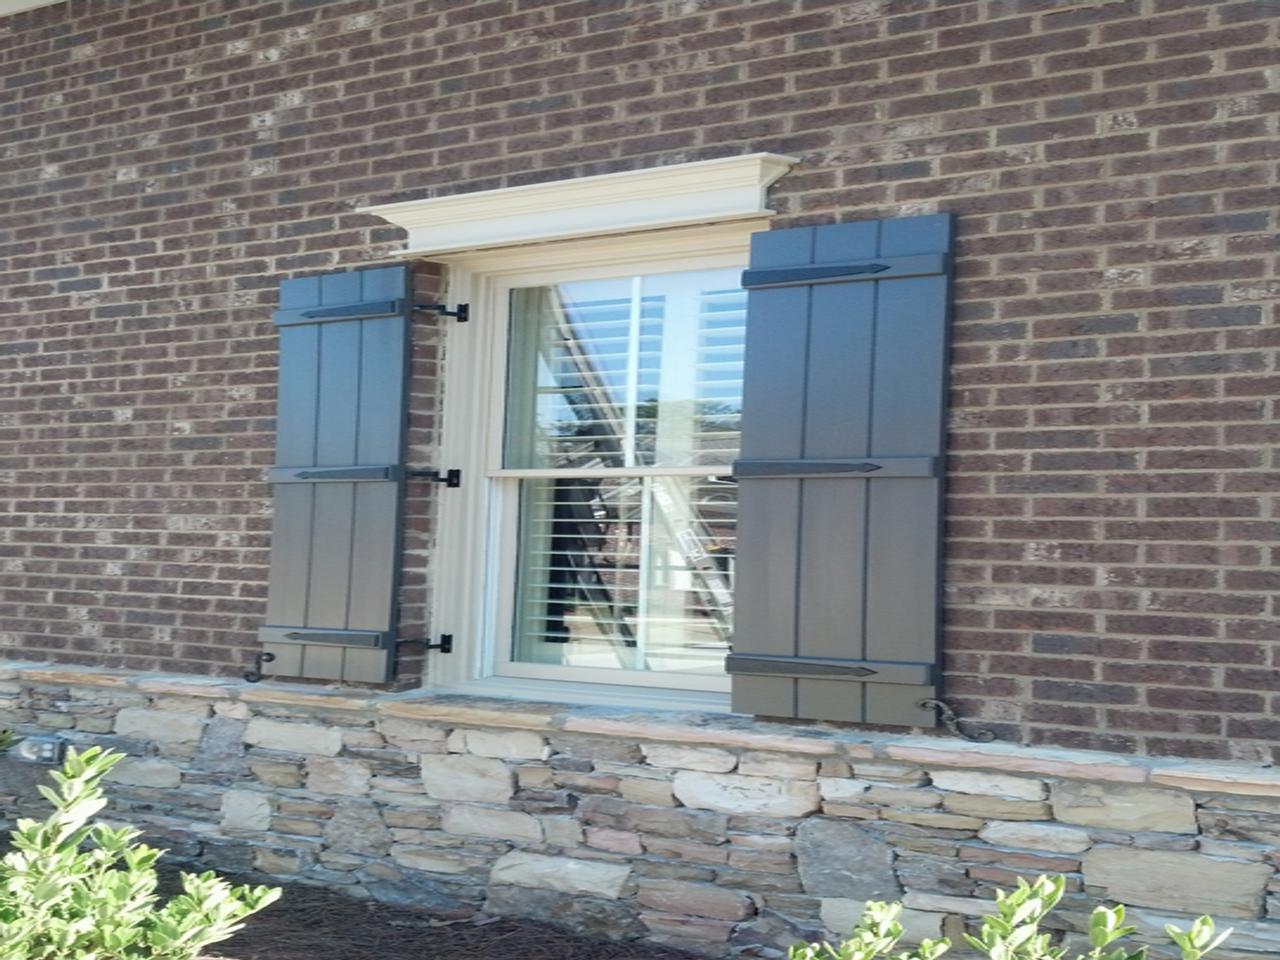 Close up view of window of brick house with board and batten shutters